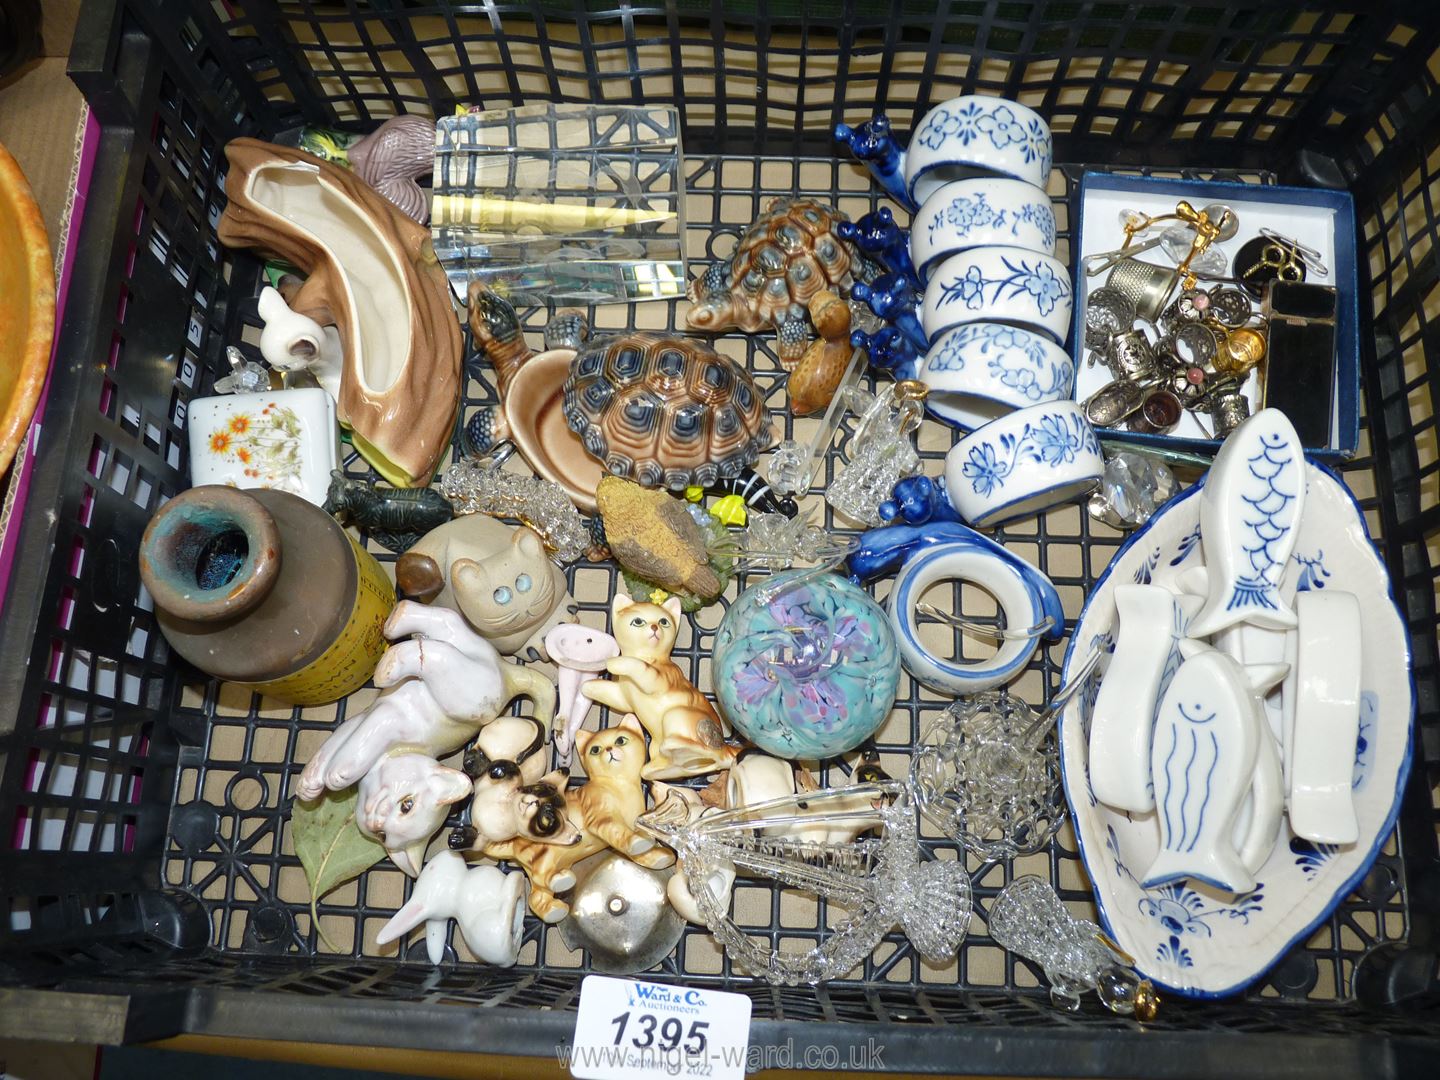 A mixed quantity of china, glass, and miscellaneous to include blue and white snail napkin rings.